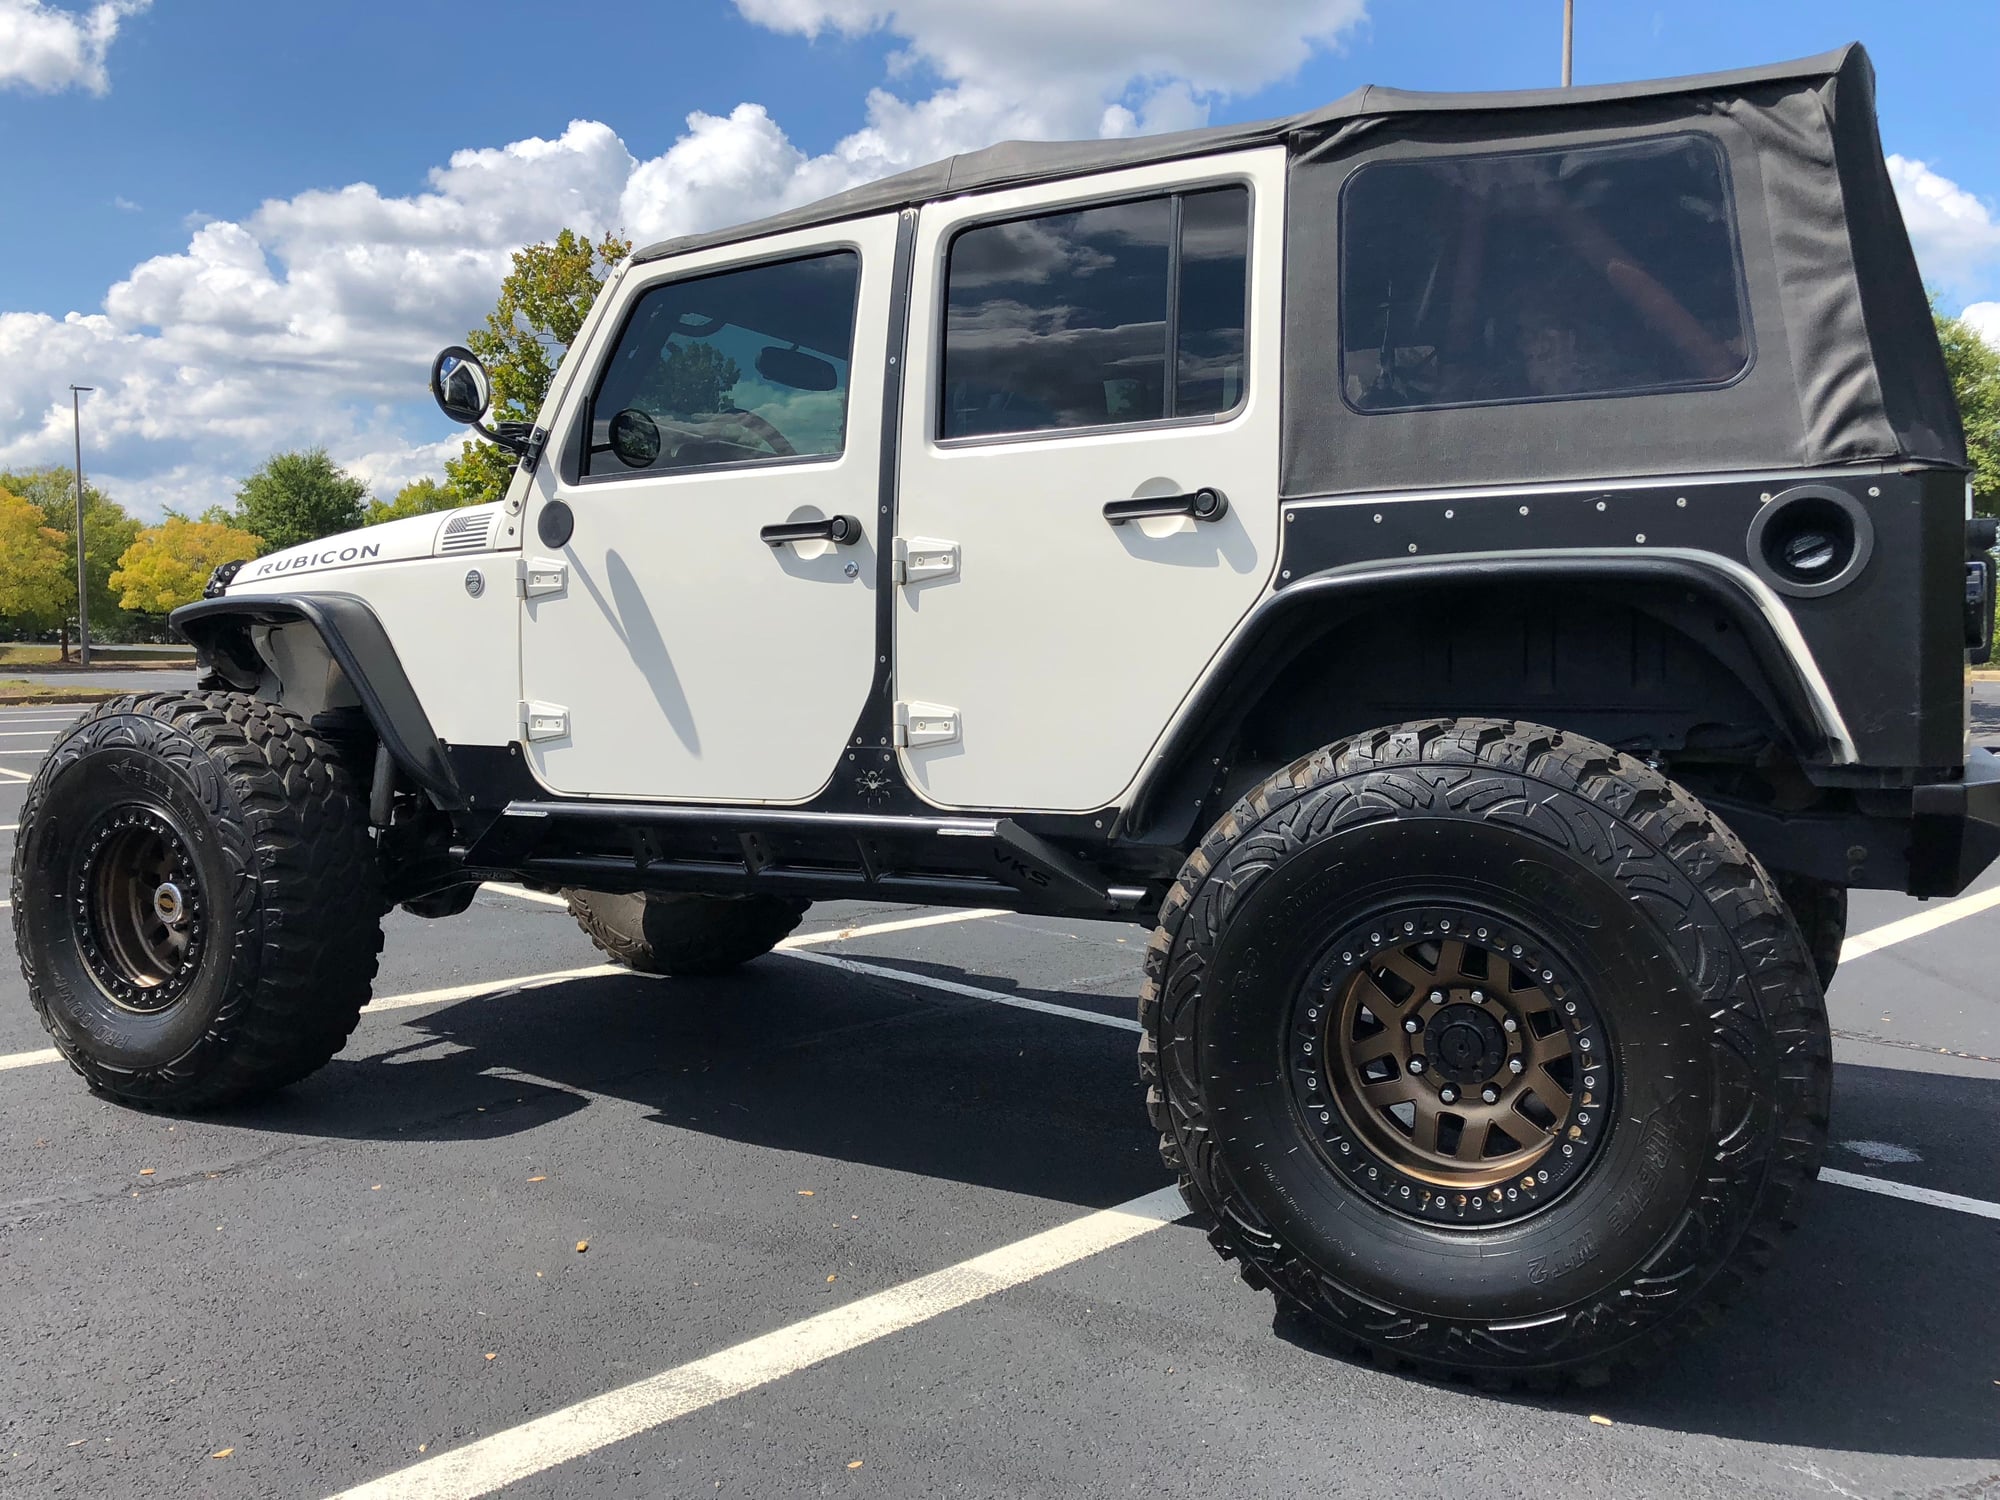 2008 Jeep Wrangler - 2008 Jeep Wrangler Rubicon Unlimited, Supercharged, Cages, Tons/40's - Used - VIN 1J4GA69198L527713 - 120,999 Miles - 6 cyl - 4WD - Automatic - SUV - White - Woodstock, GA 30188, United States